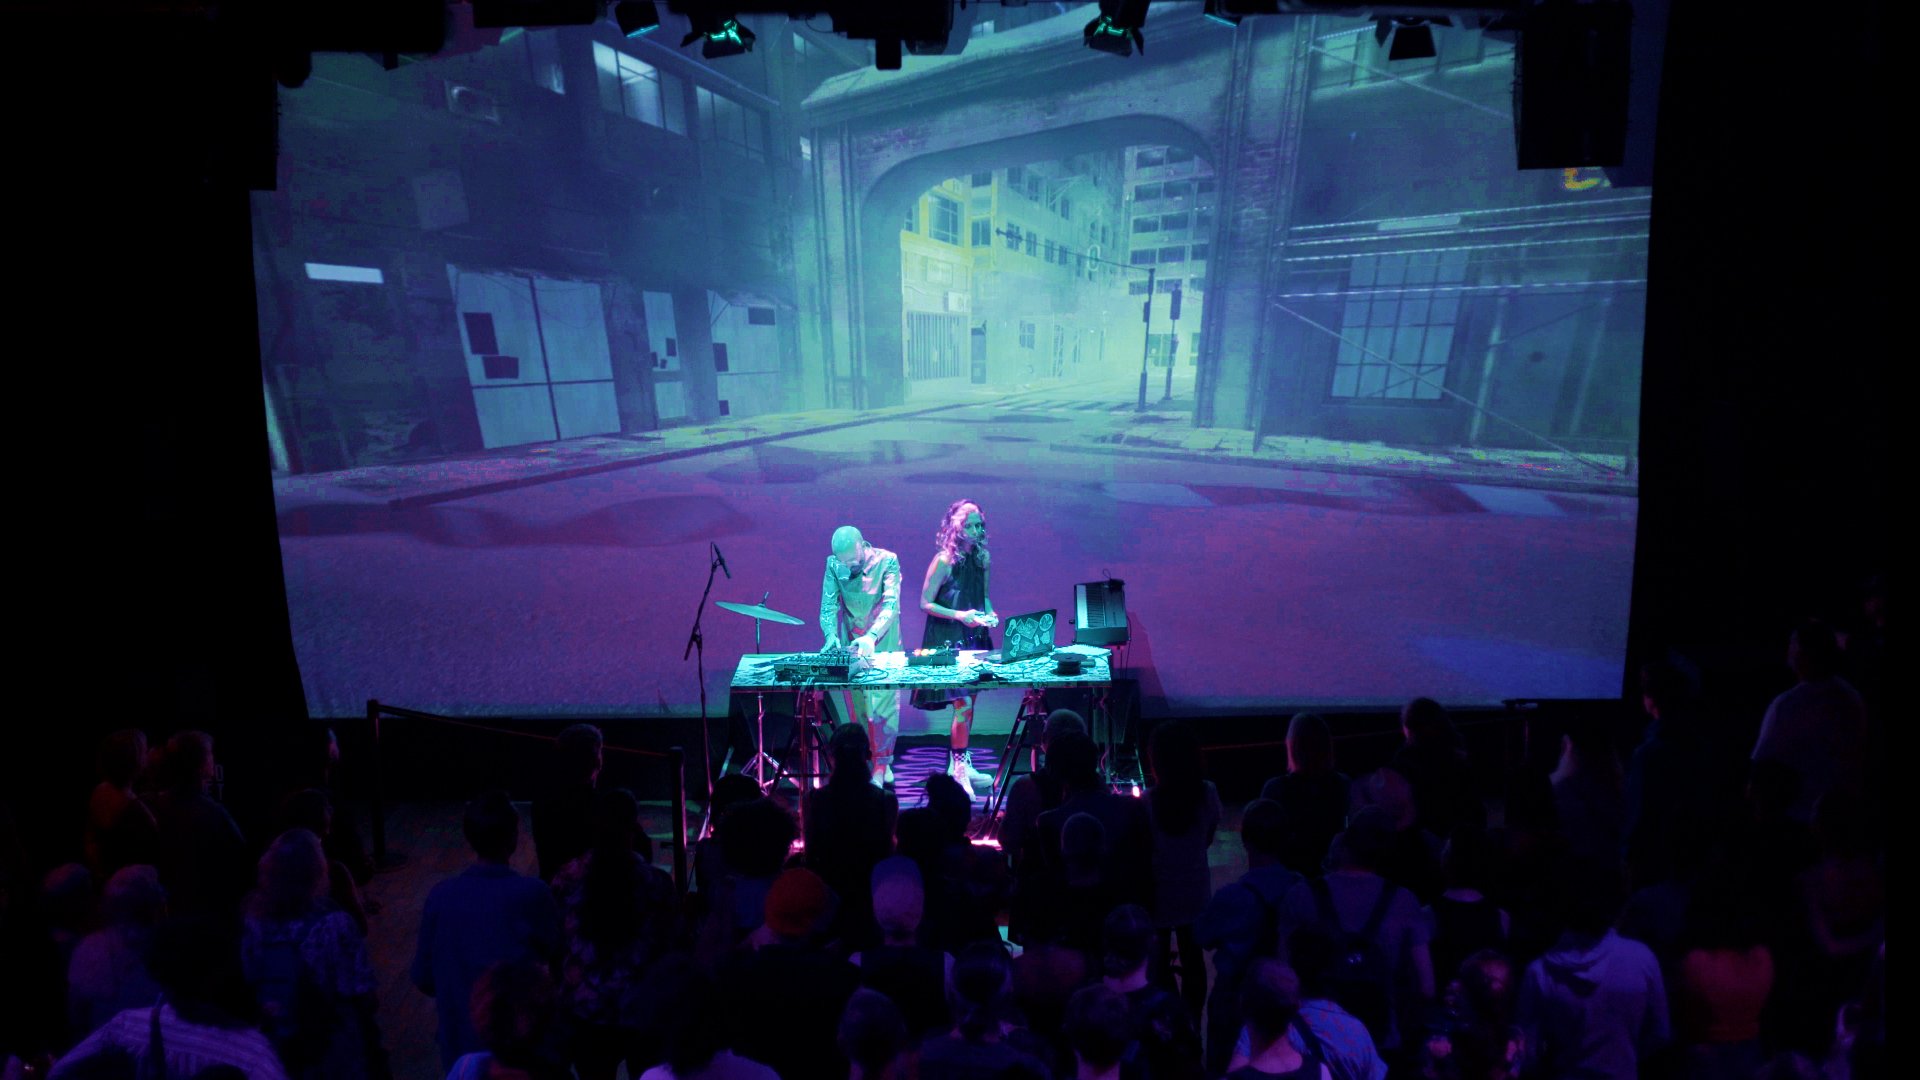  A woman with a games controller and a man with synth on stage playing music in front of giant projected image of a video game slum street 